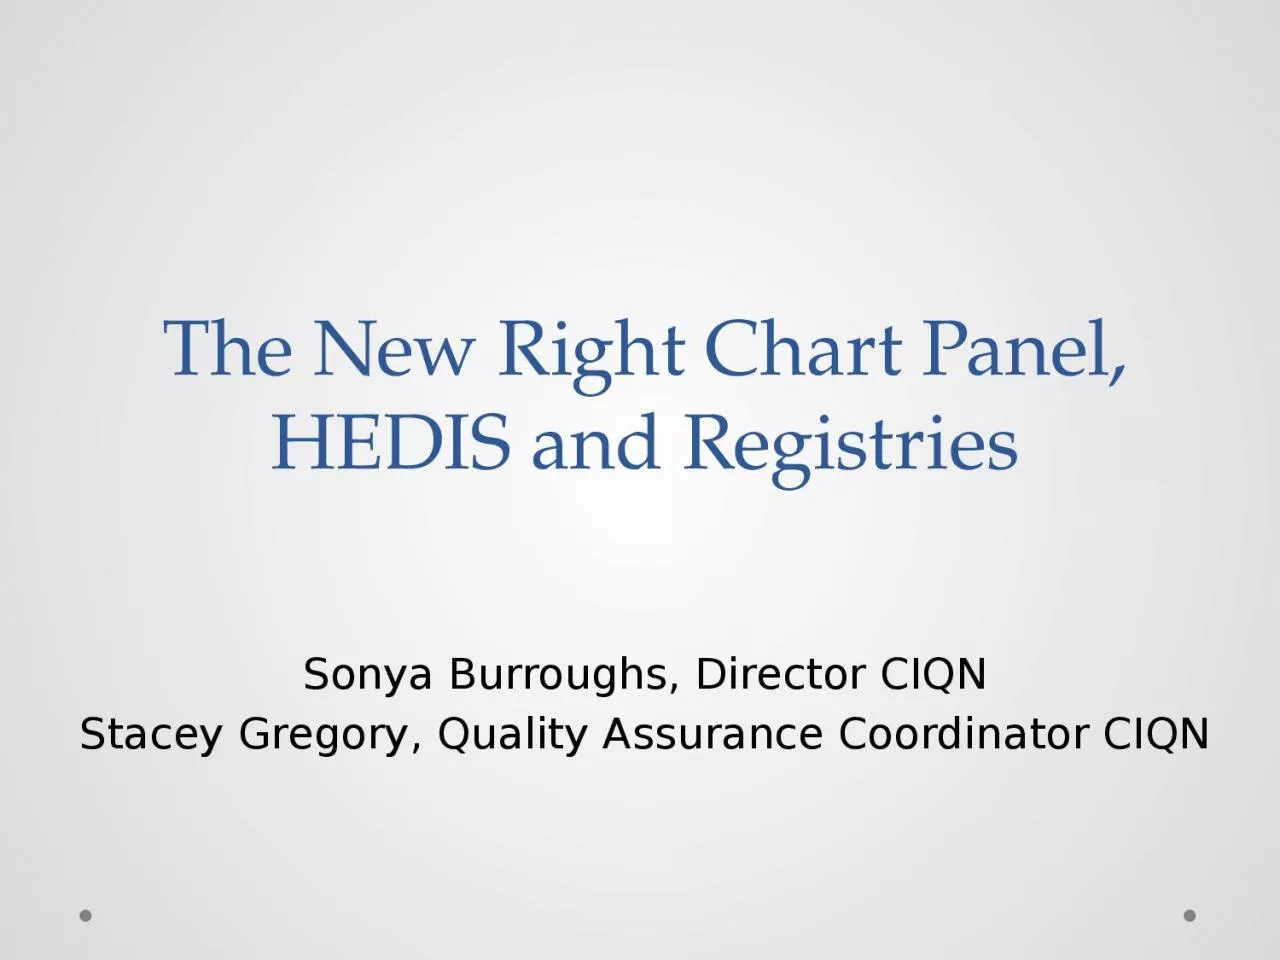 The New Right Chart Panel, HEDIS and Registries